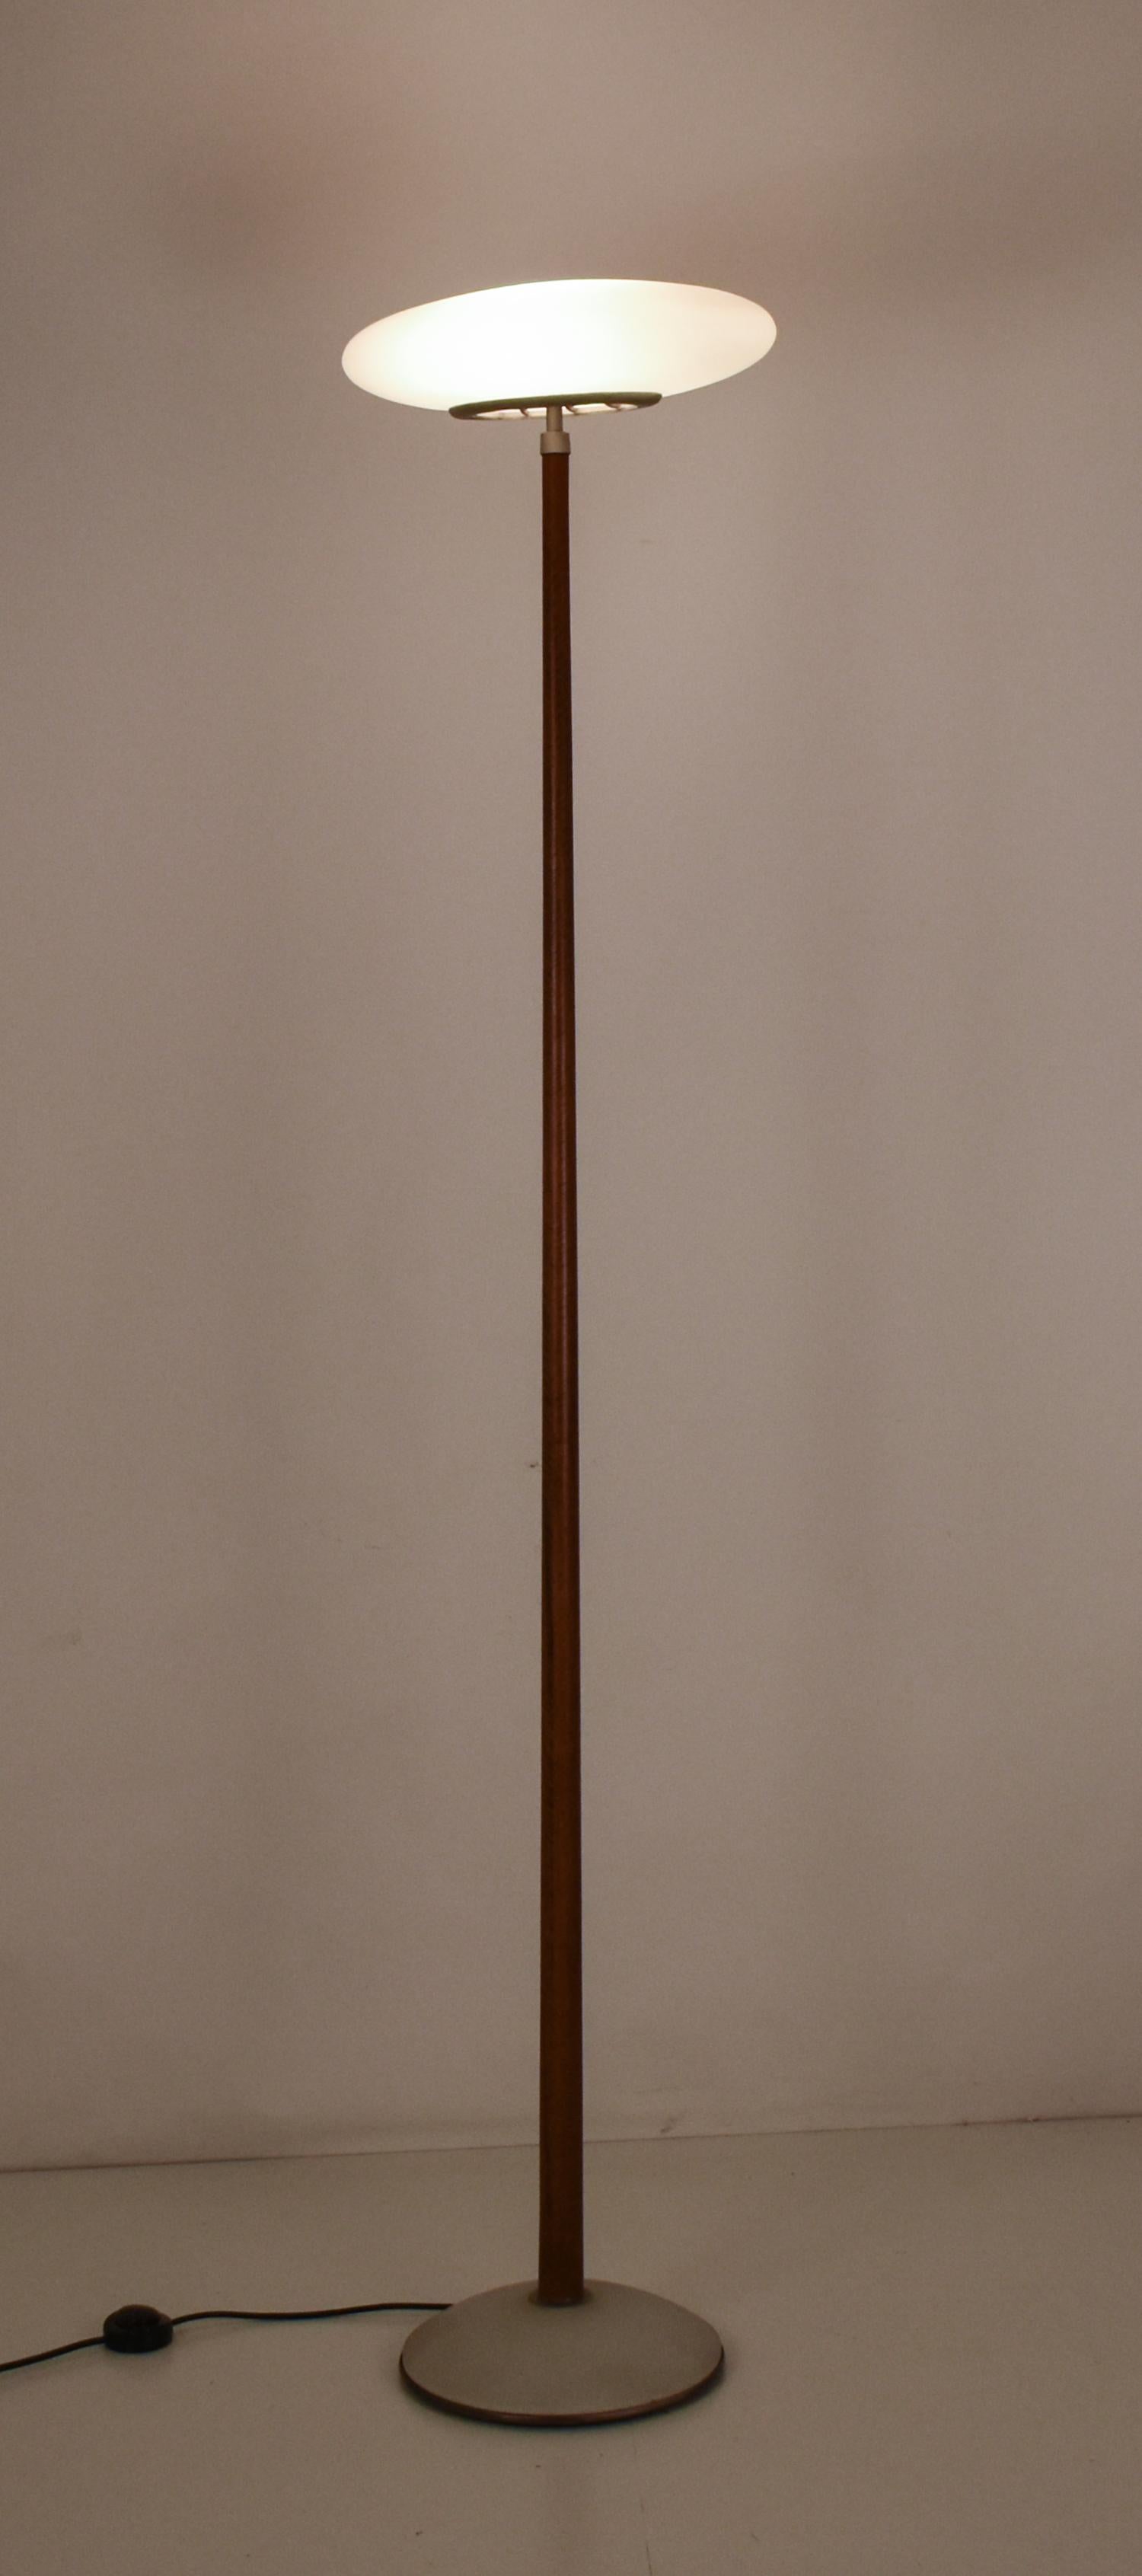 PAO Floor Lamp by Matteo Thun for Arteluce, Italy 1990's For Sale 3